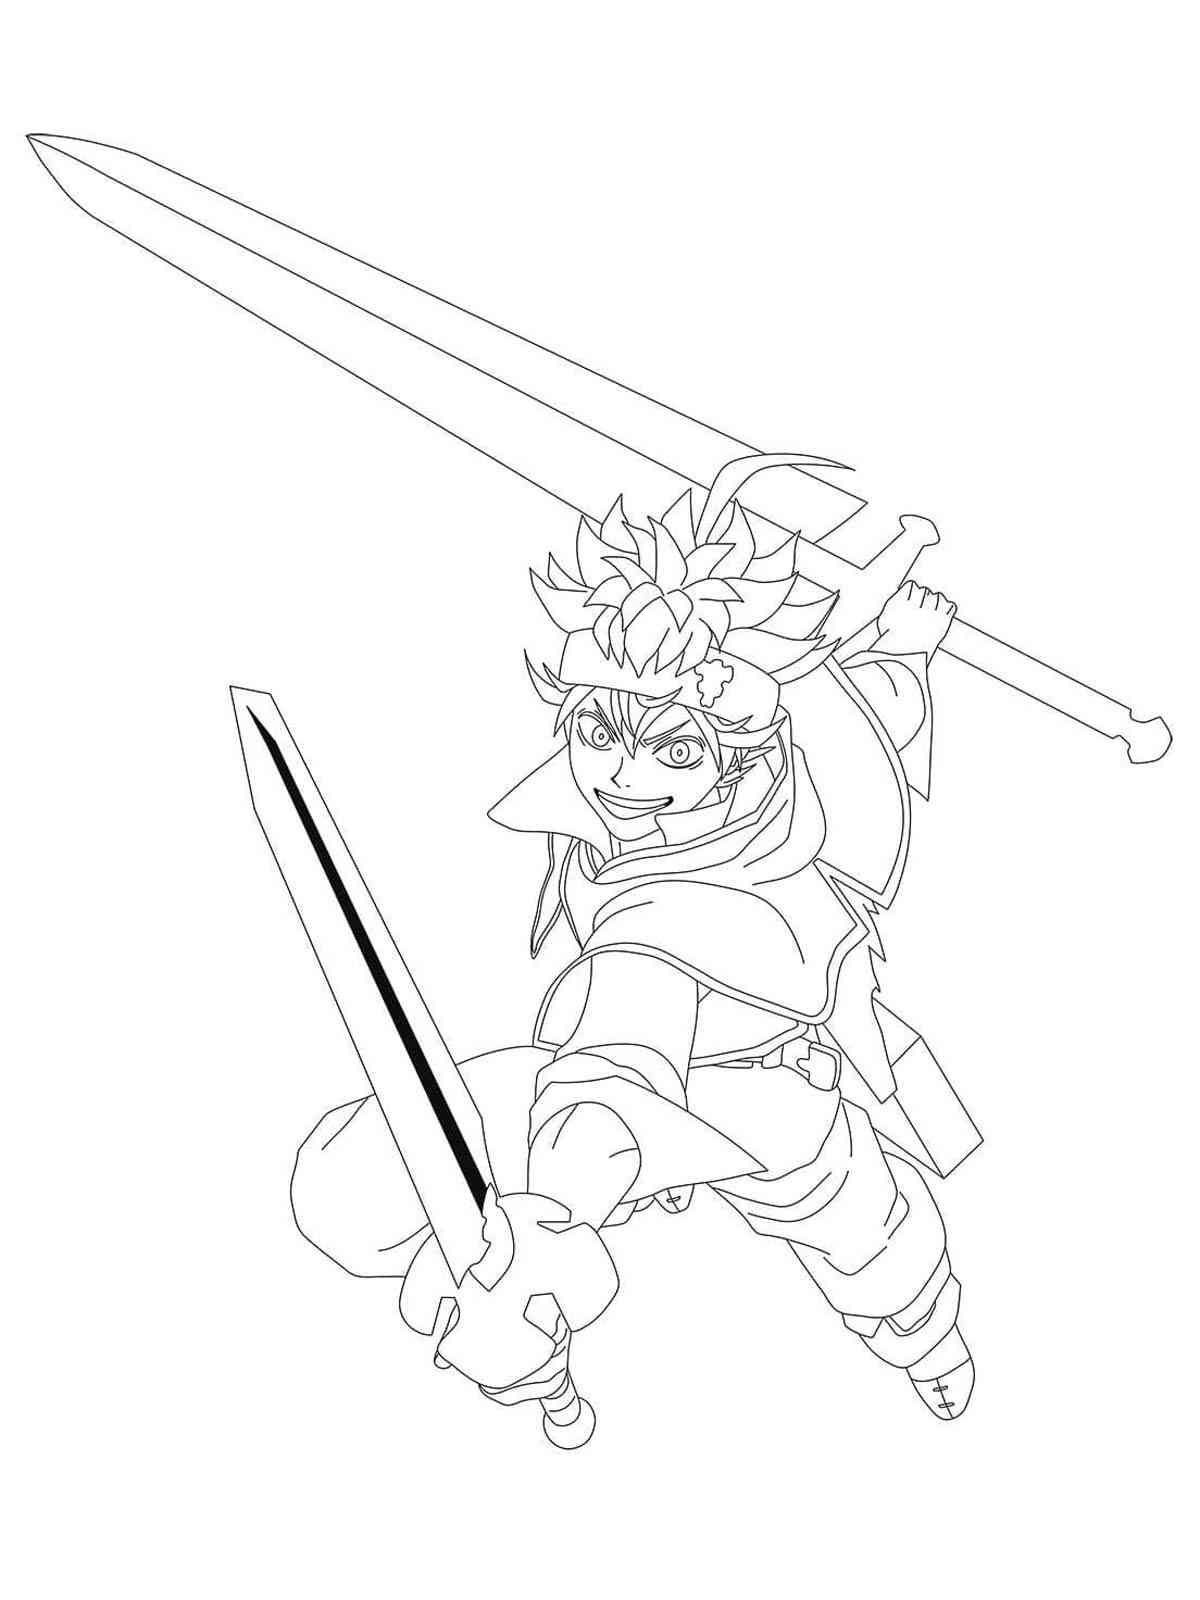 Asta with two swords coloring page